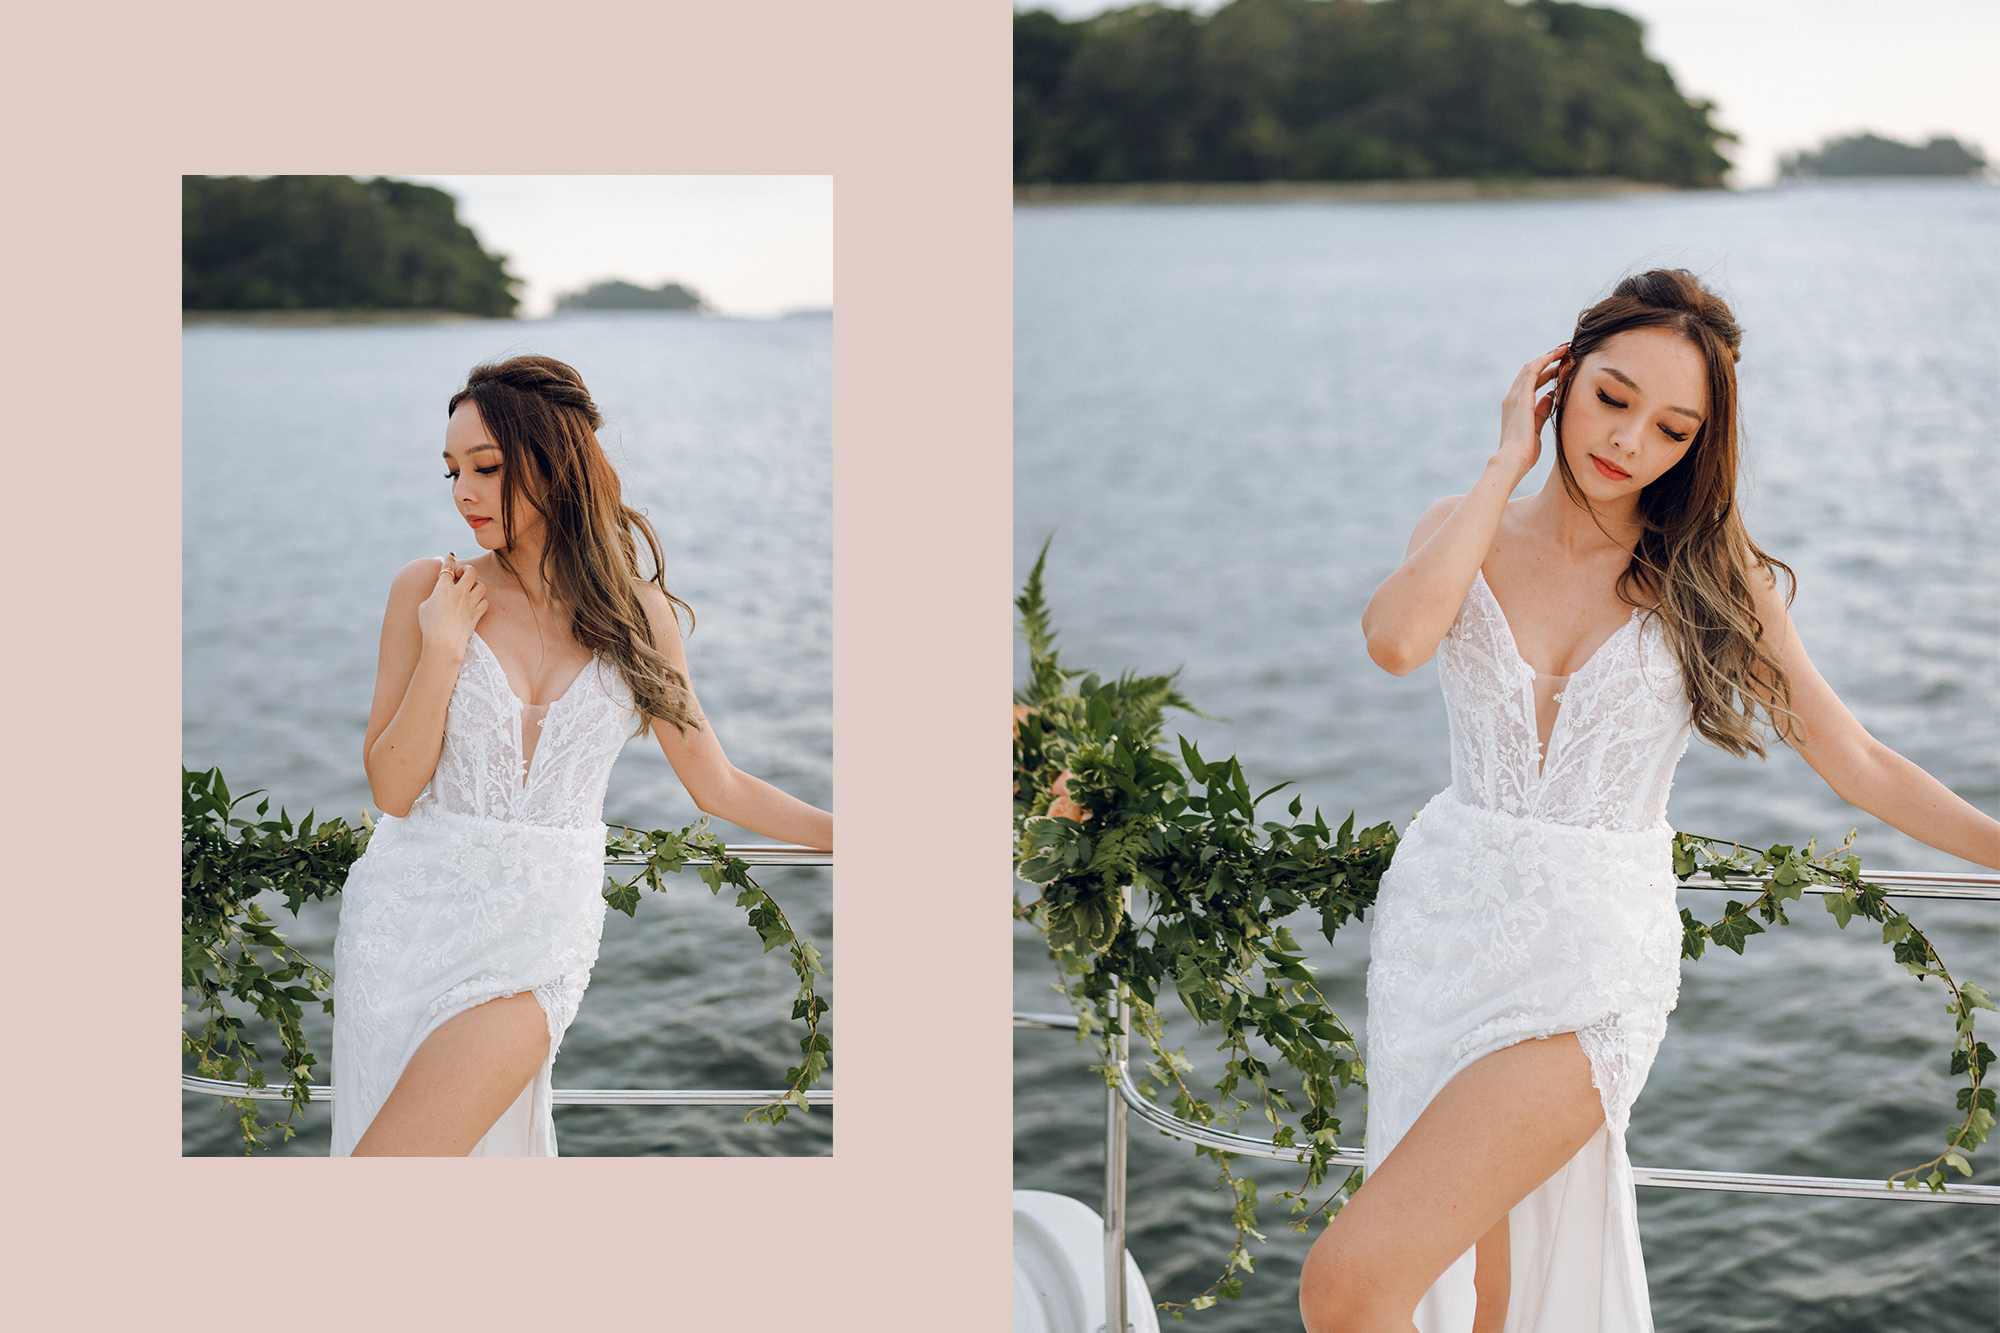 Sunset Prewedding Photoshoot On A Yacht With Romantic Floral Styling by Samantha on OneThreeOneFour 16